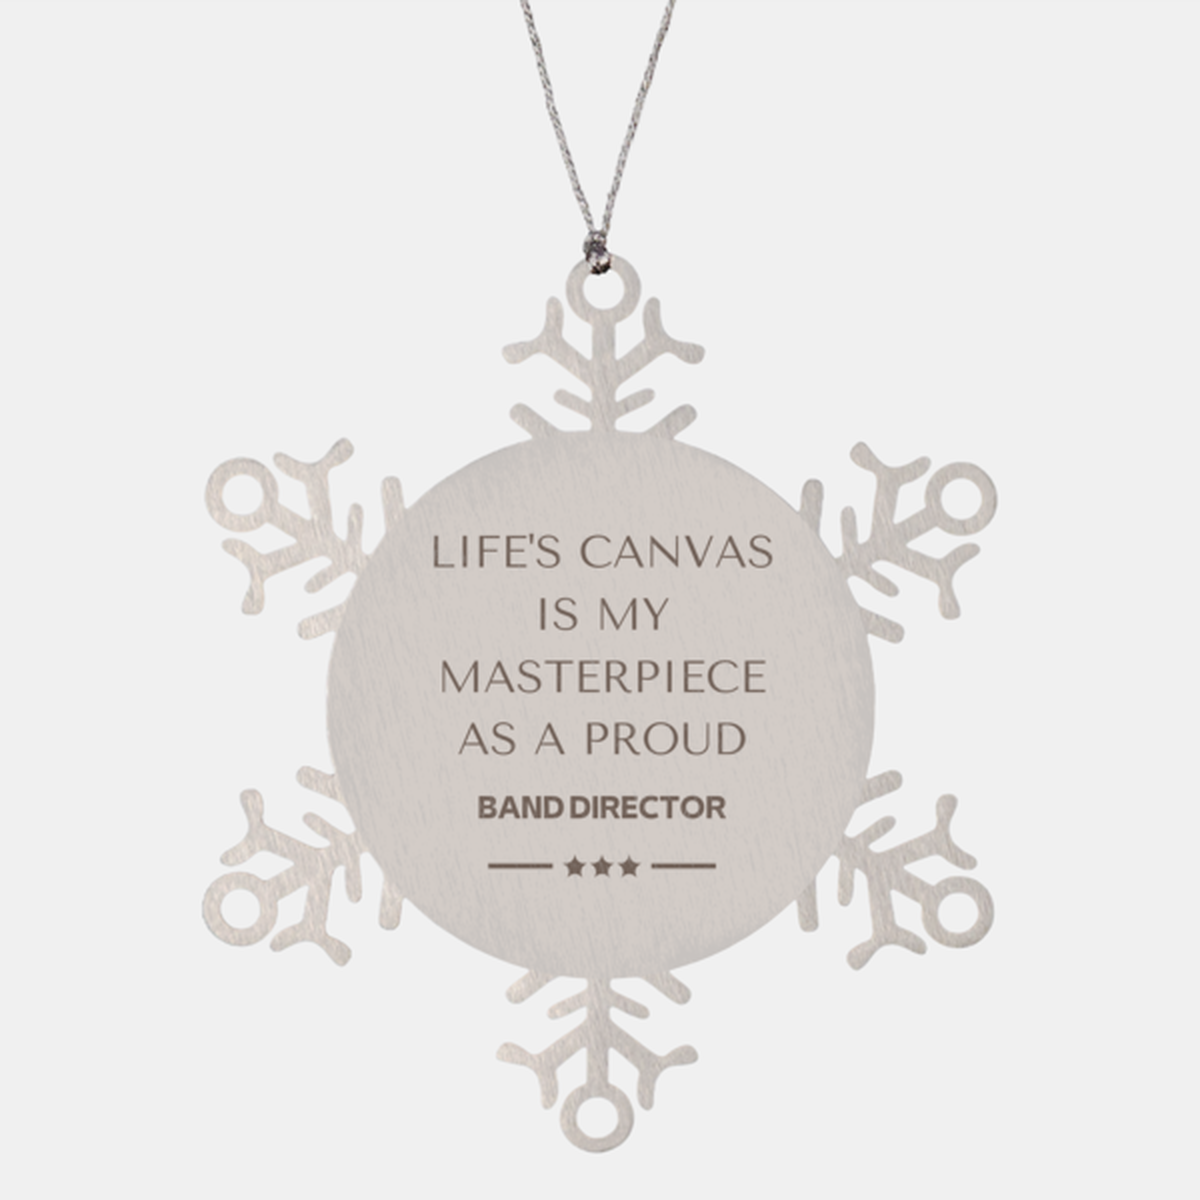 Proud Band Director Gifts, Life's canvas is my masterpiece, Epic Birthday Christmas Unique Snowflake Ornament For Band Director, Coworkers, Men, Women, Friends